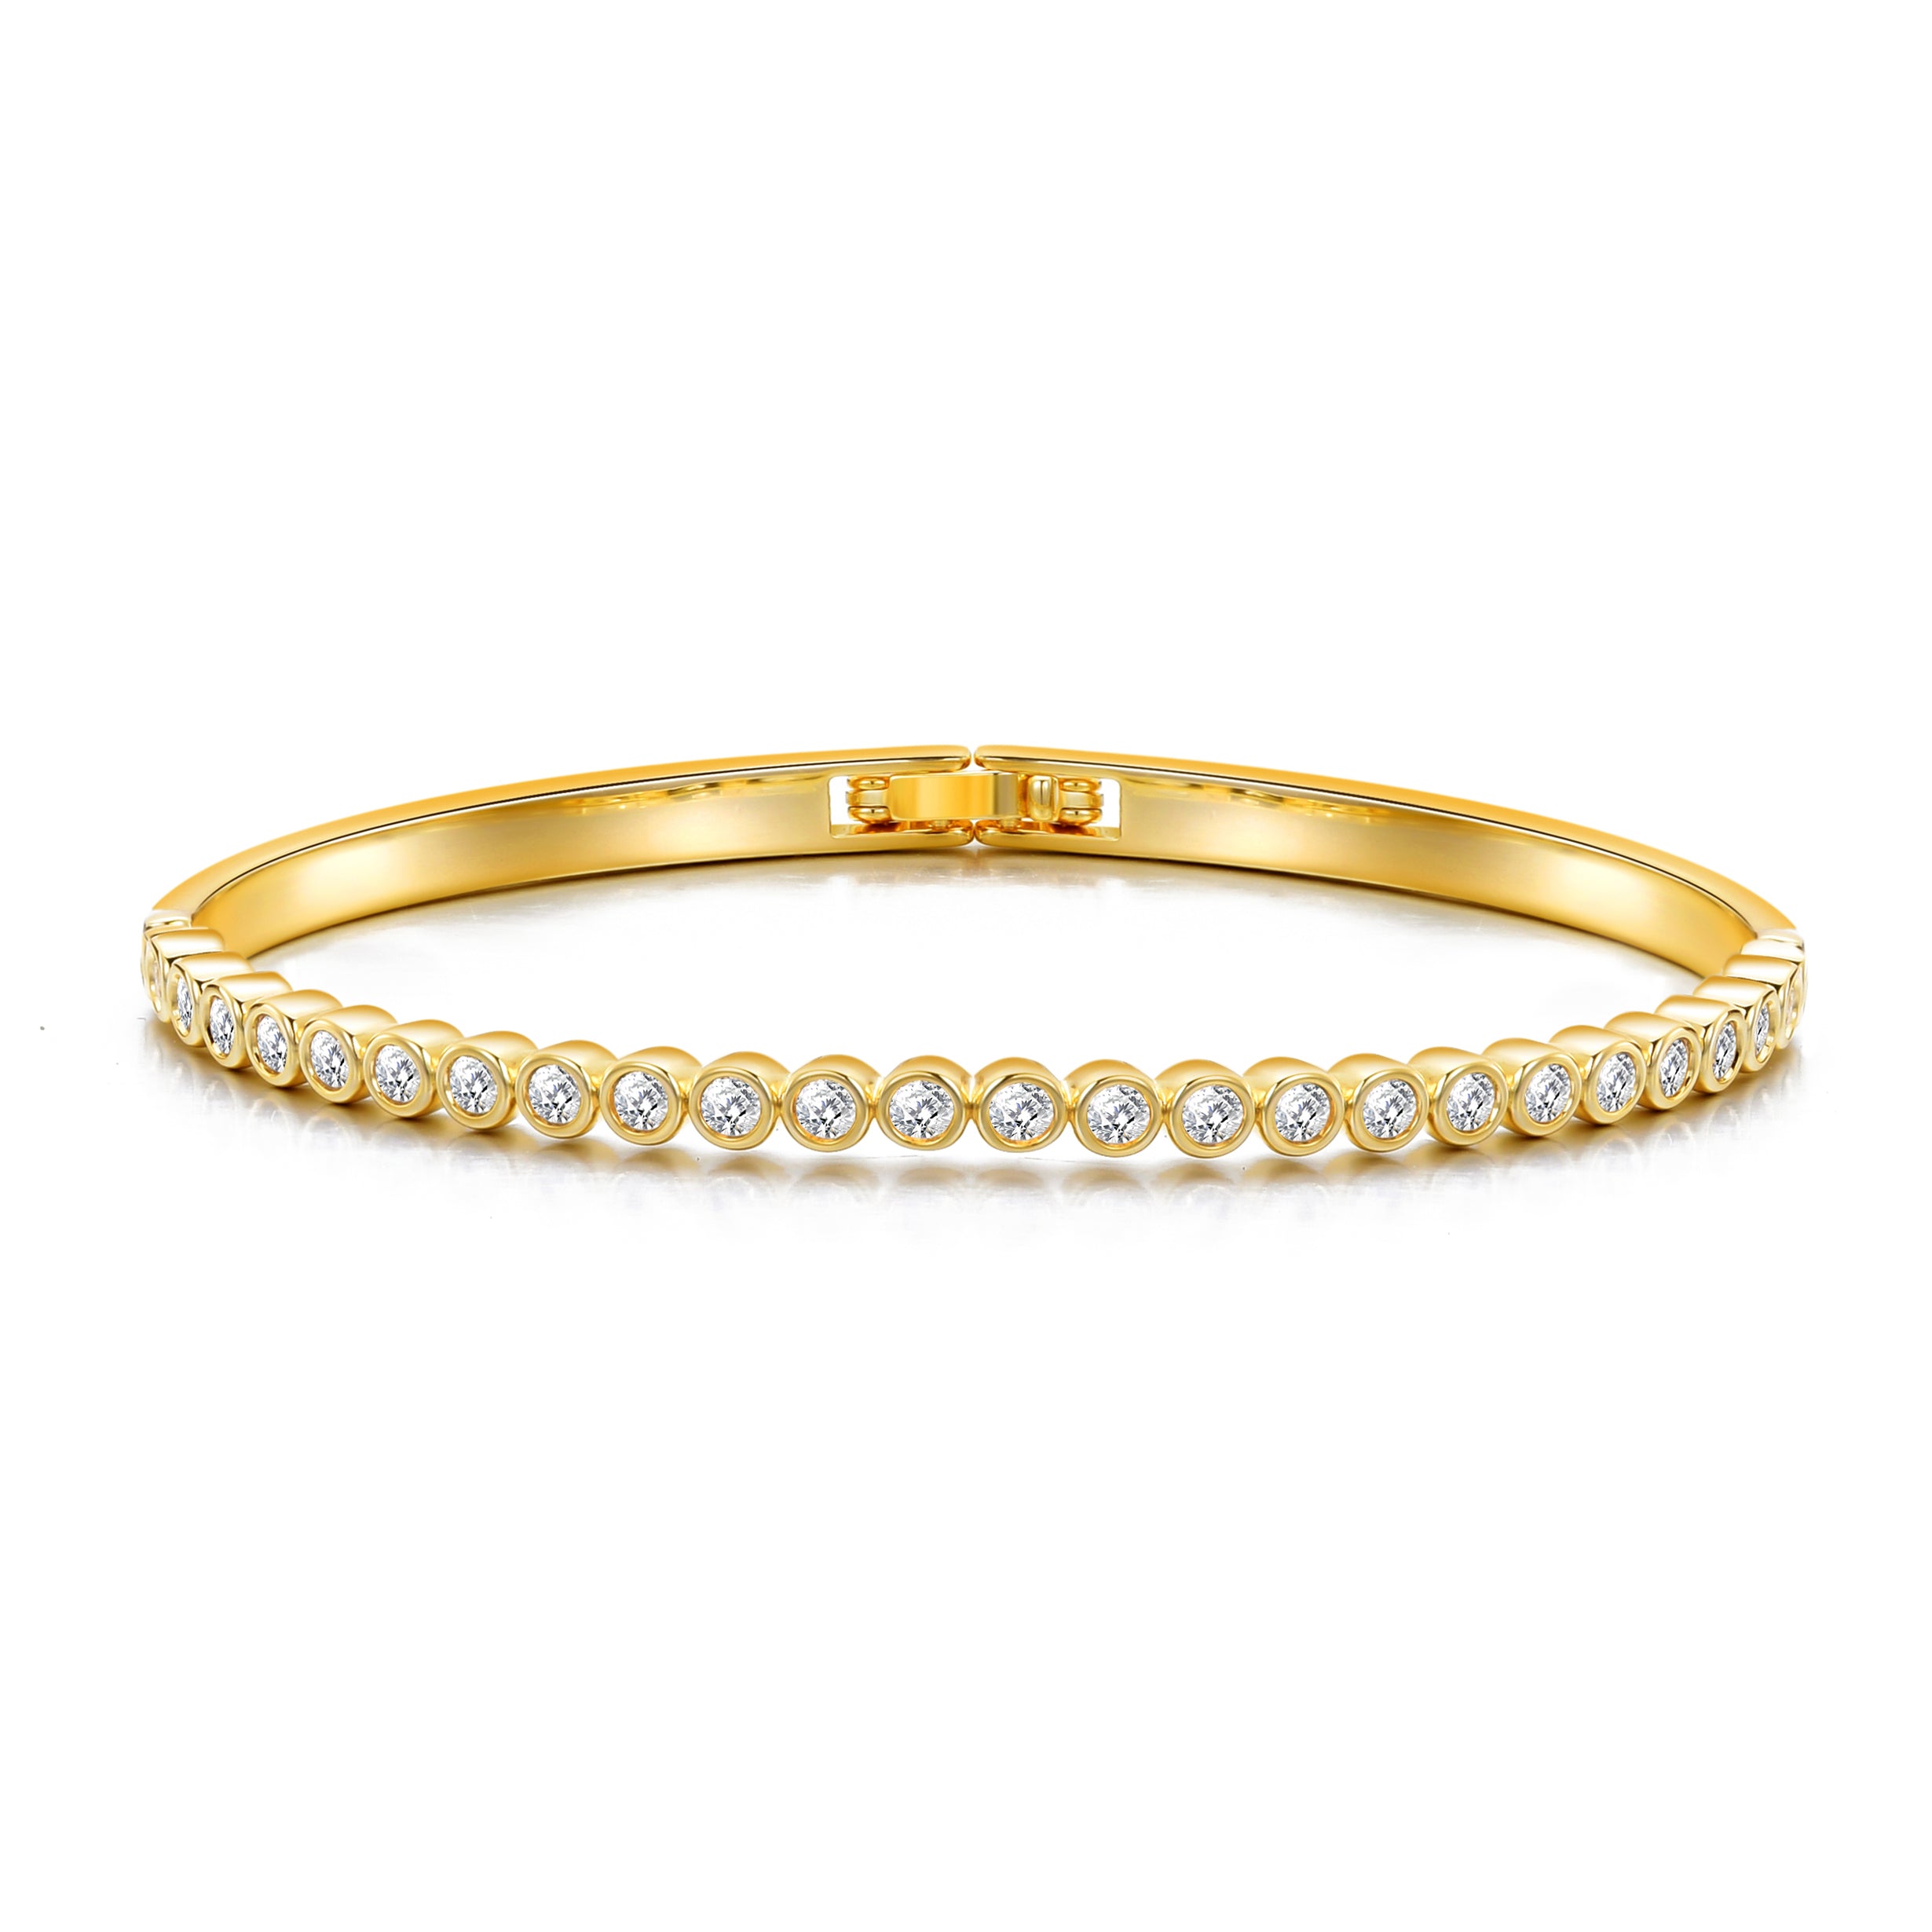 Gold Plated Tennis Bangle Created with Zircondia® Crystals by Philip Jones Jewellery